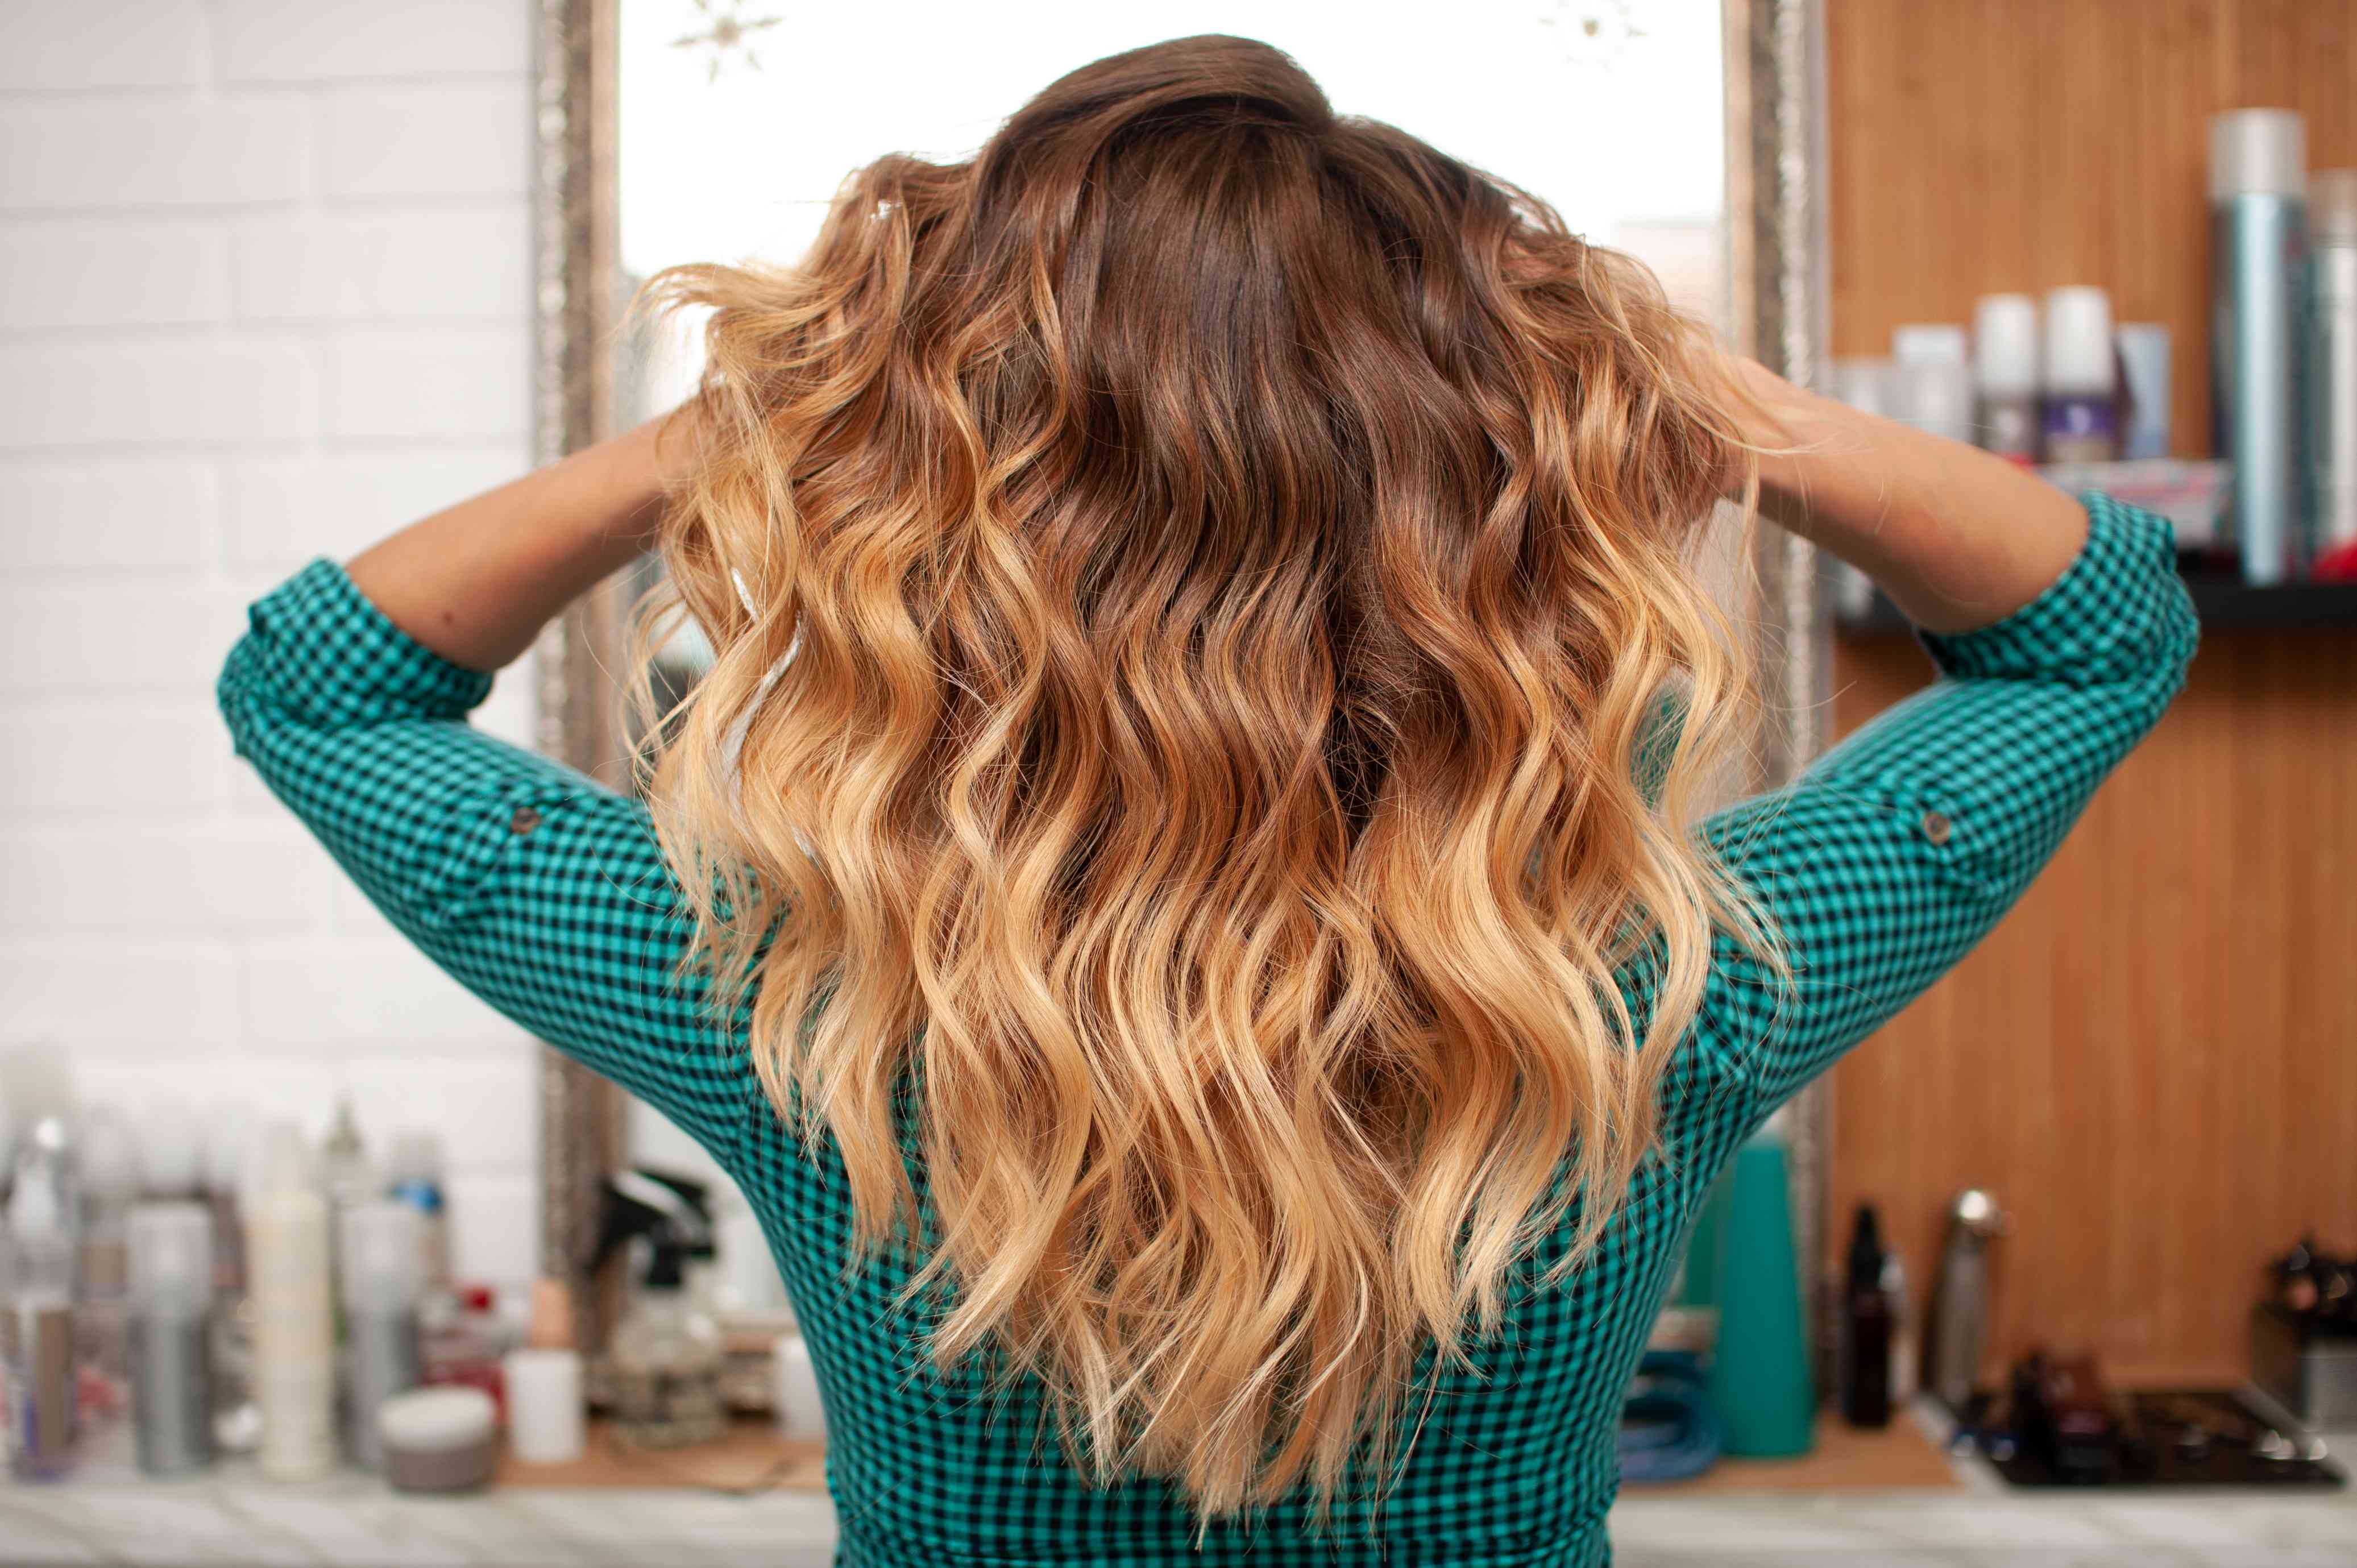 5 Tips for Natural Wavy Hair Care